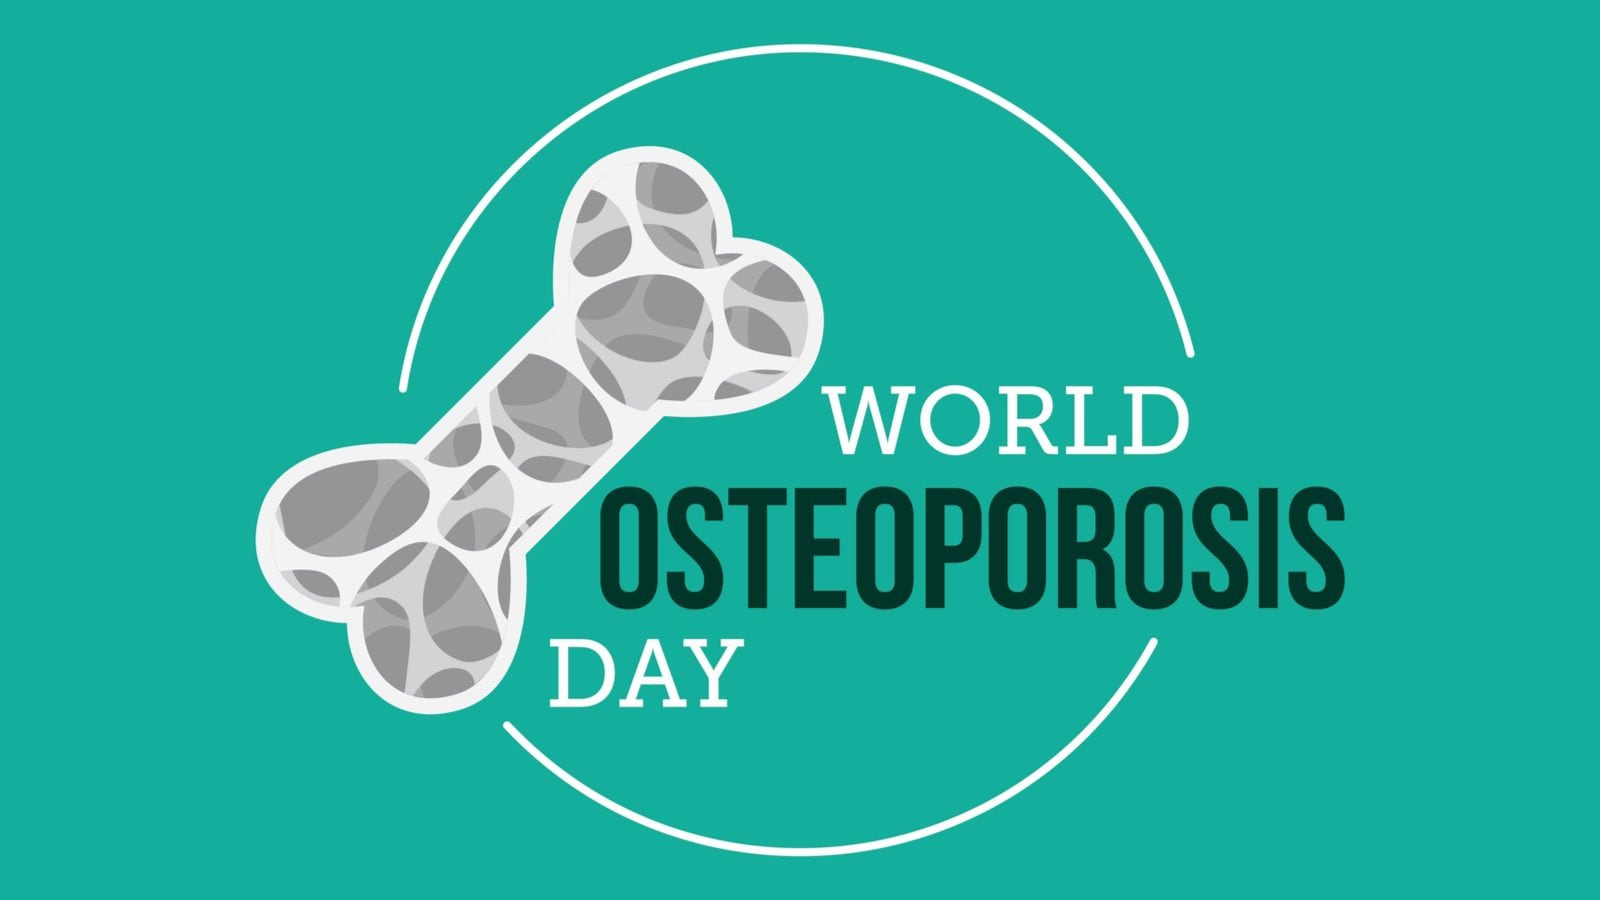 World Osteoporosis Day: What is Osteoporosis, Symptoms of this Silent Disease